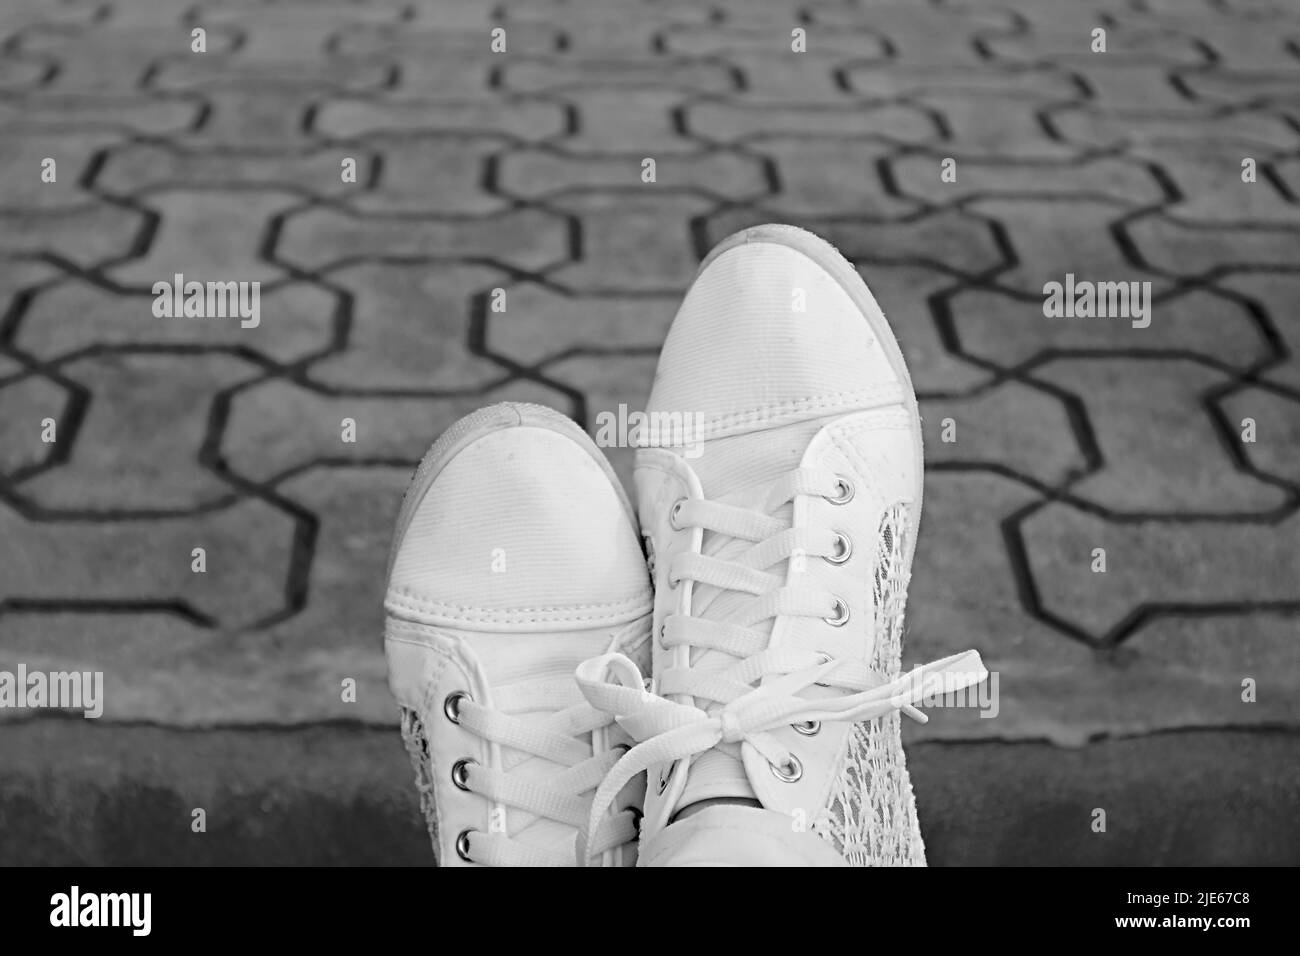 Monochrome image of feet in white sneakers relaxing on the garden's concrete block pavement Stock Photo